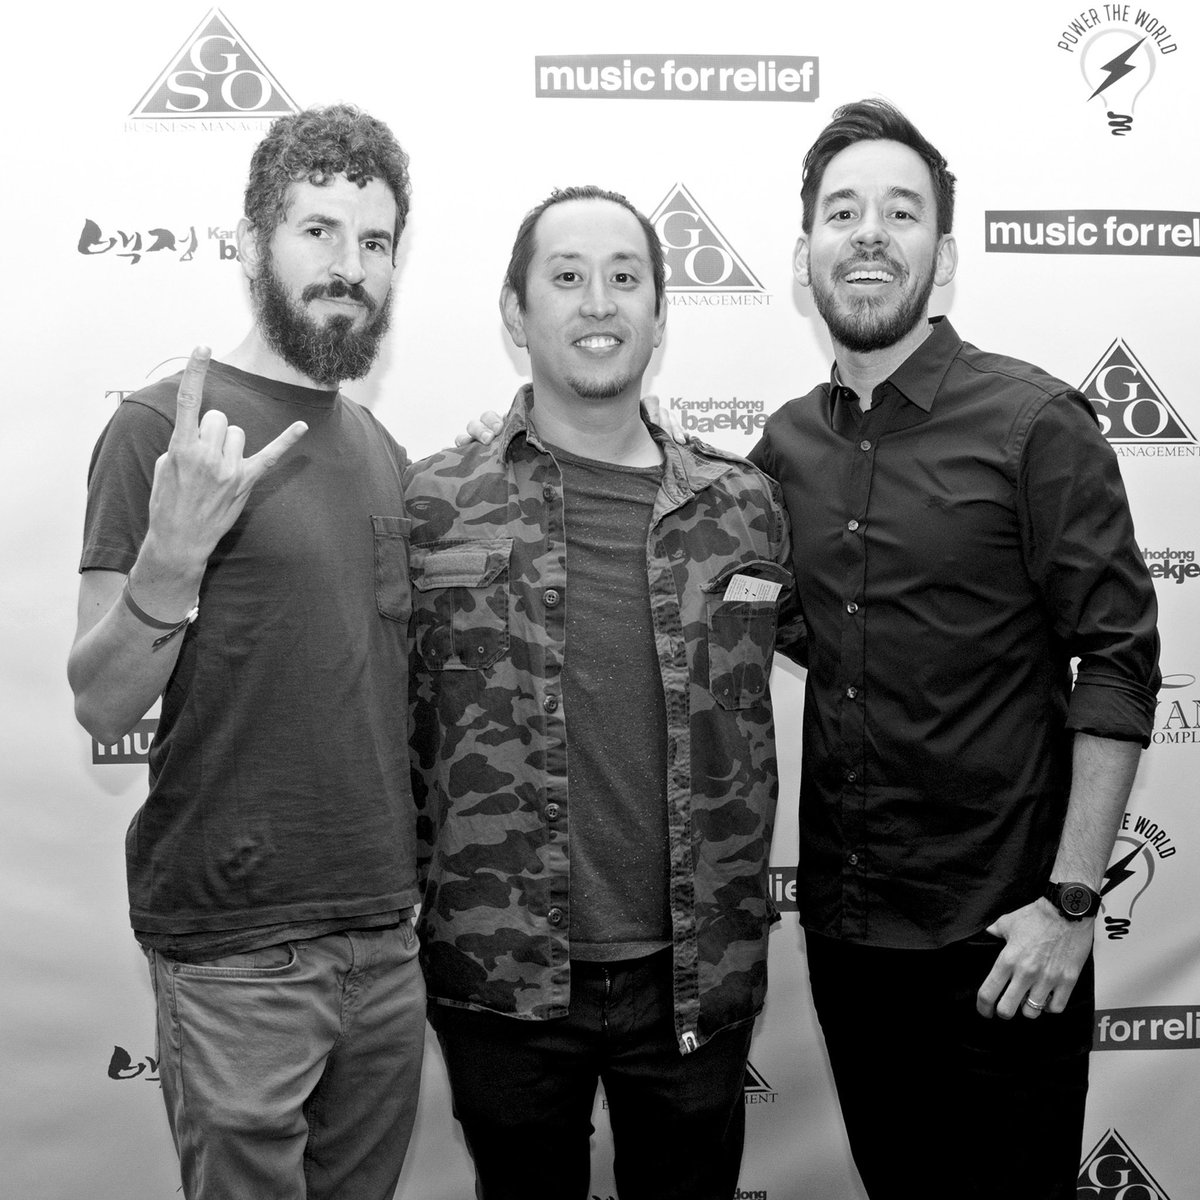 Brad, Joe, and Mike at last night's #pokerforrelief event, benefiting @musicforrelief. ????: @AmandaG_08 https://t.co/PNExCRAHaR